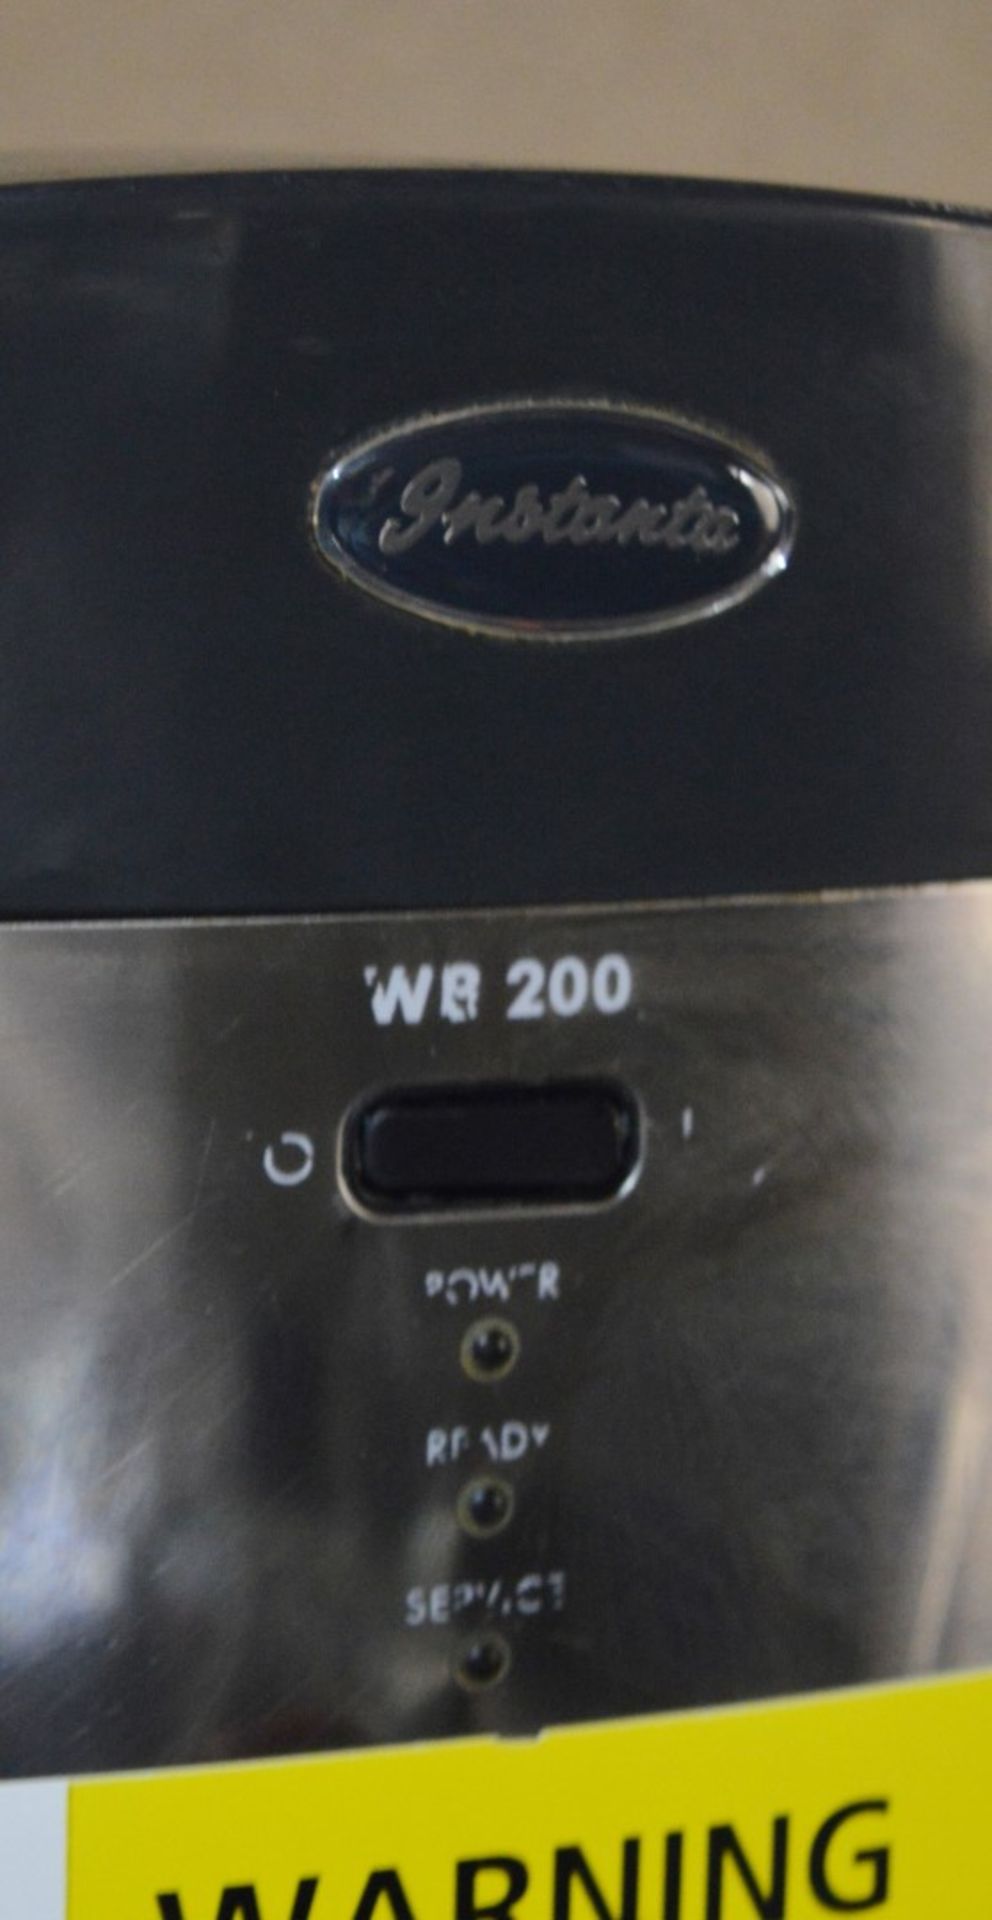 1 x Instanta WB200 Autofill Thermostat Controlled Water Boiler - Stainless Steel Finish - 28 Liter - Image 2 of 4